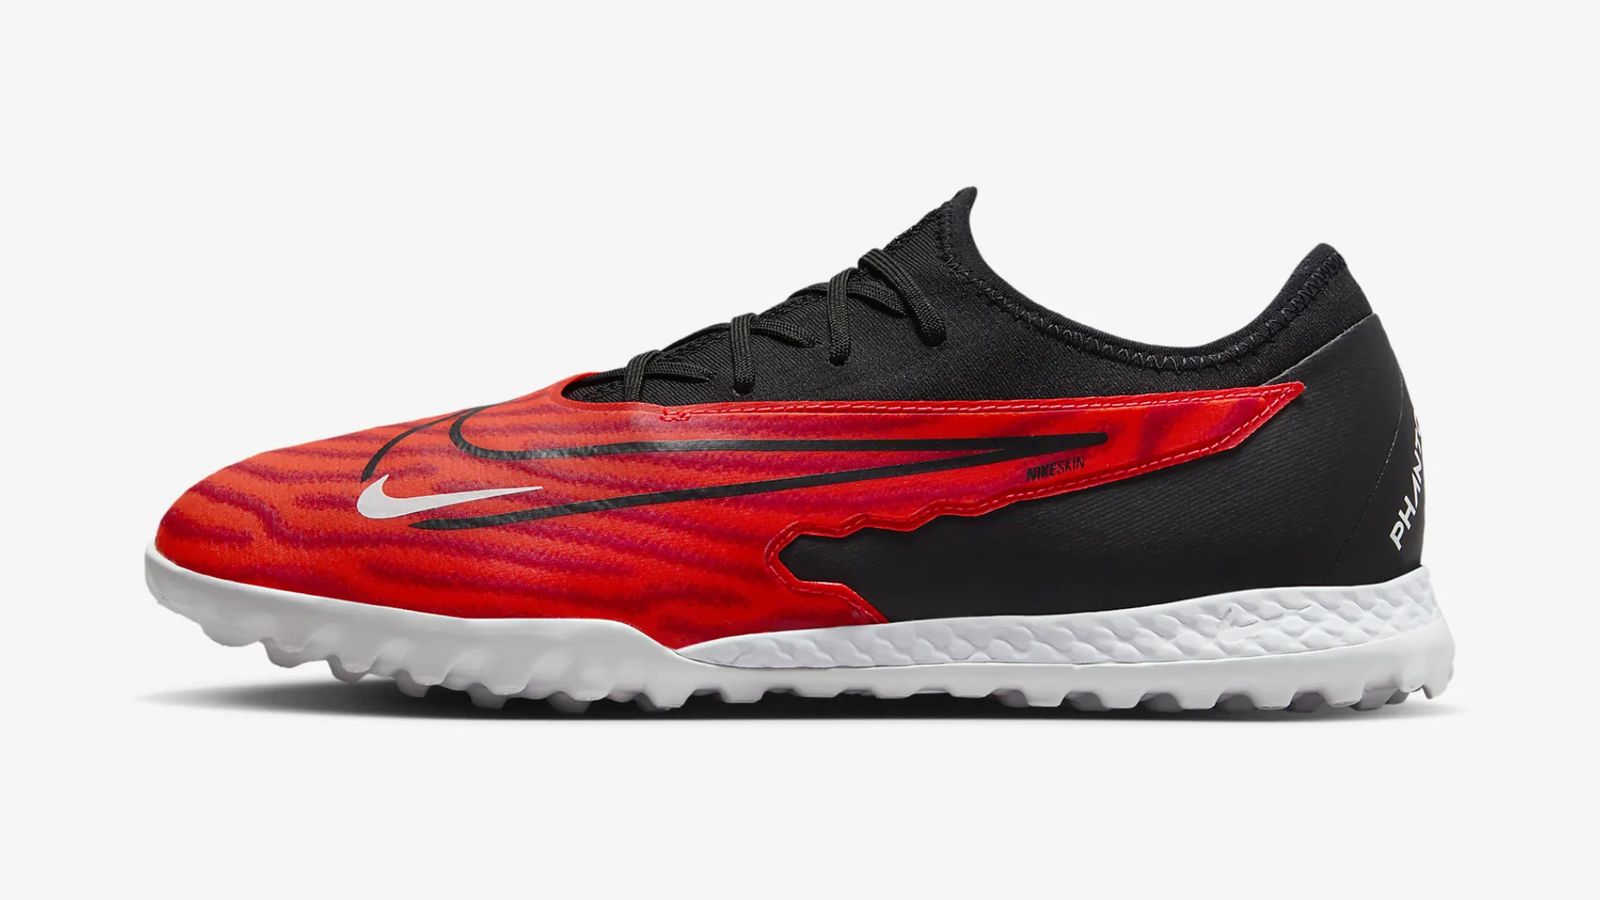 Nike React Phantom GX Pro TF product image of a red and black astro turf boot featuring a white midsole.